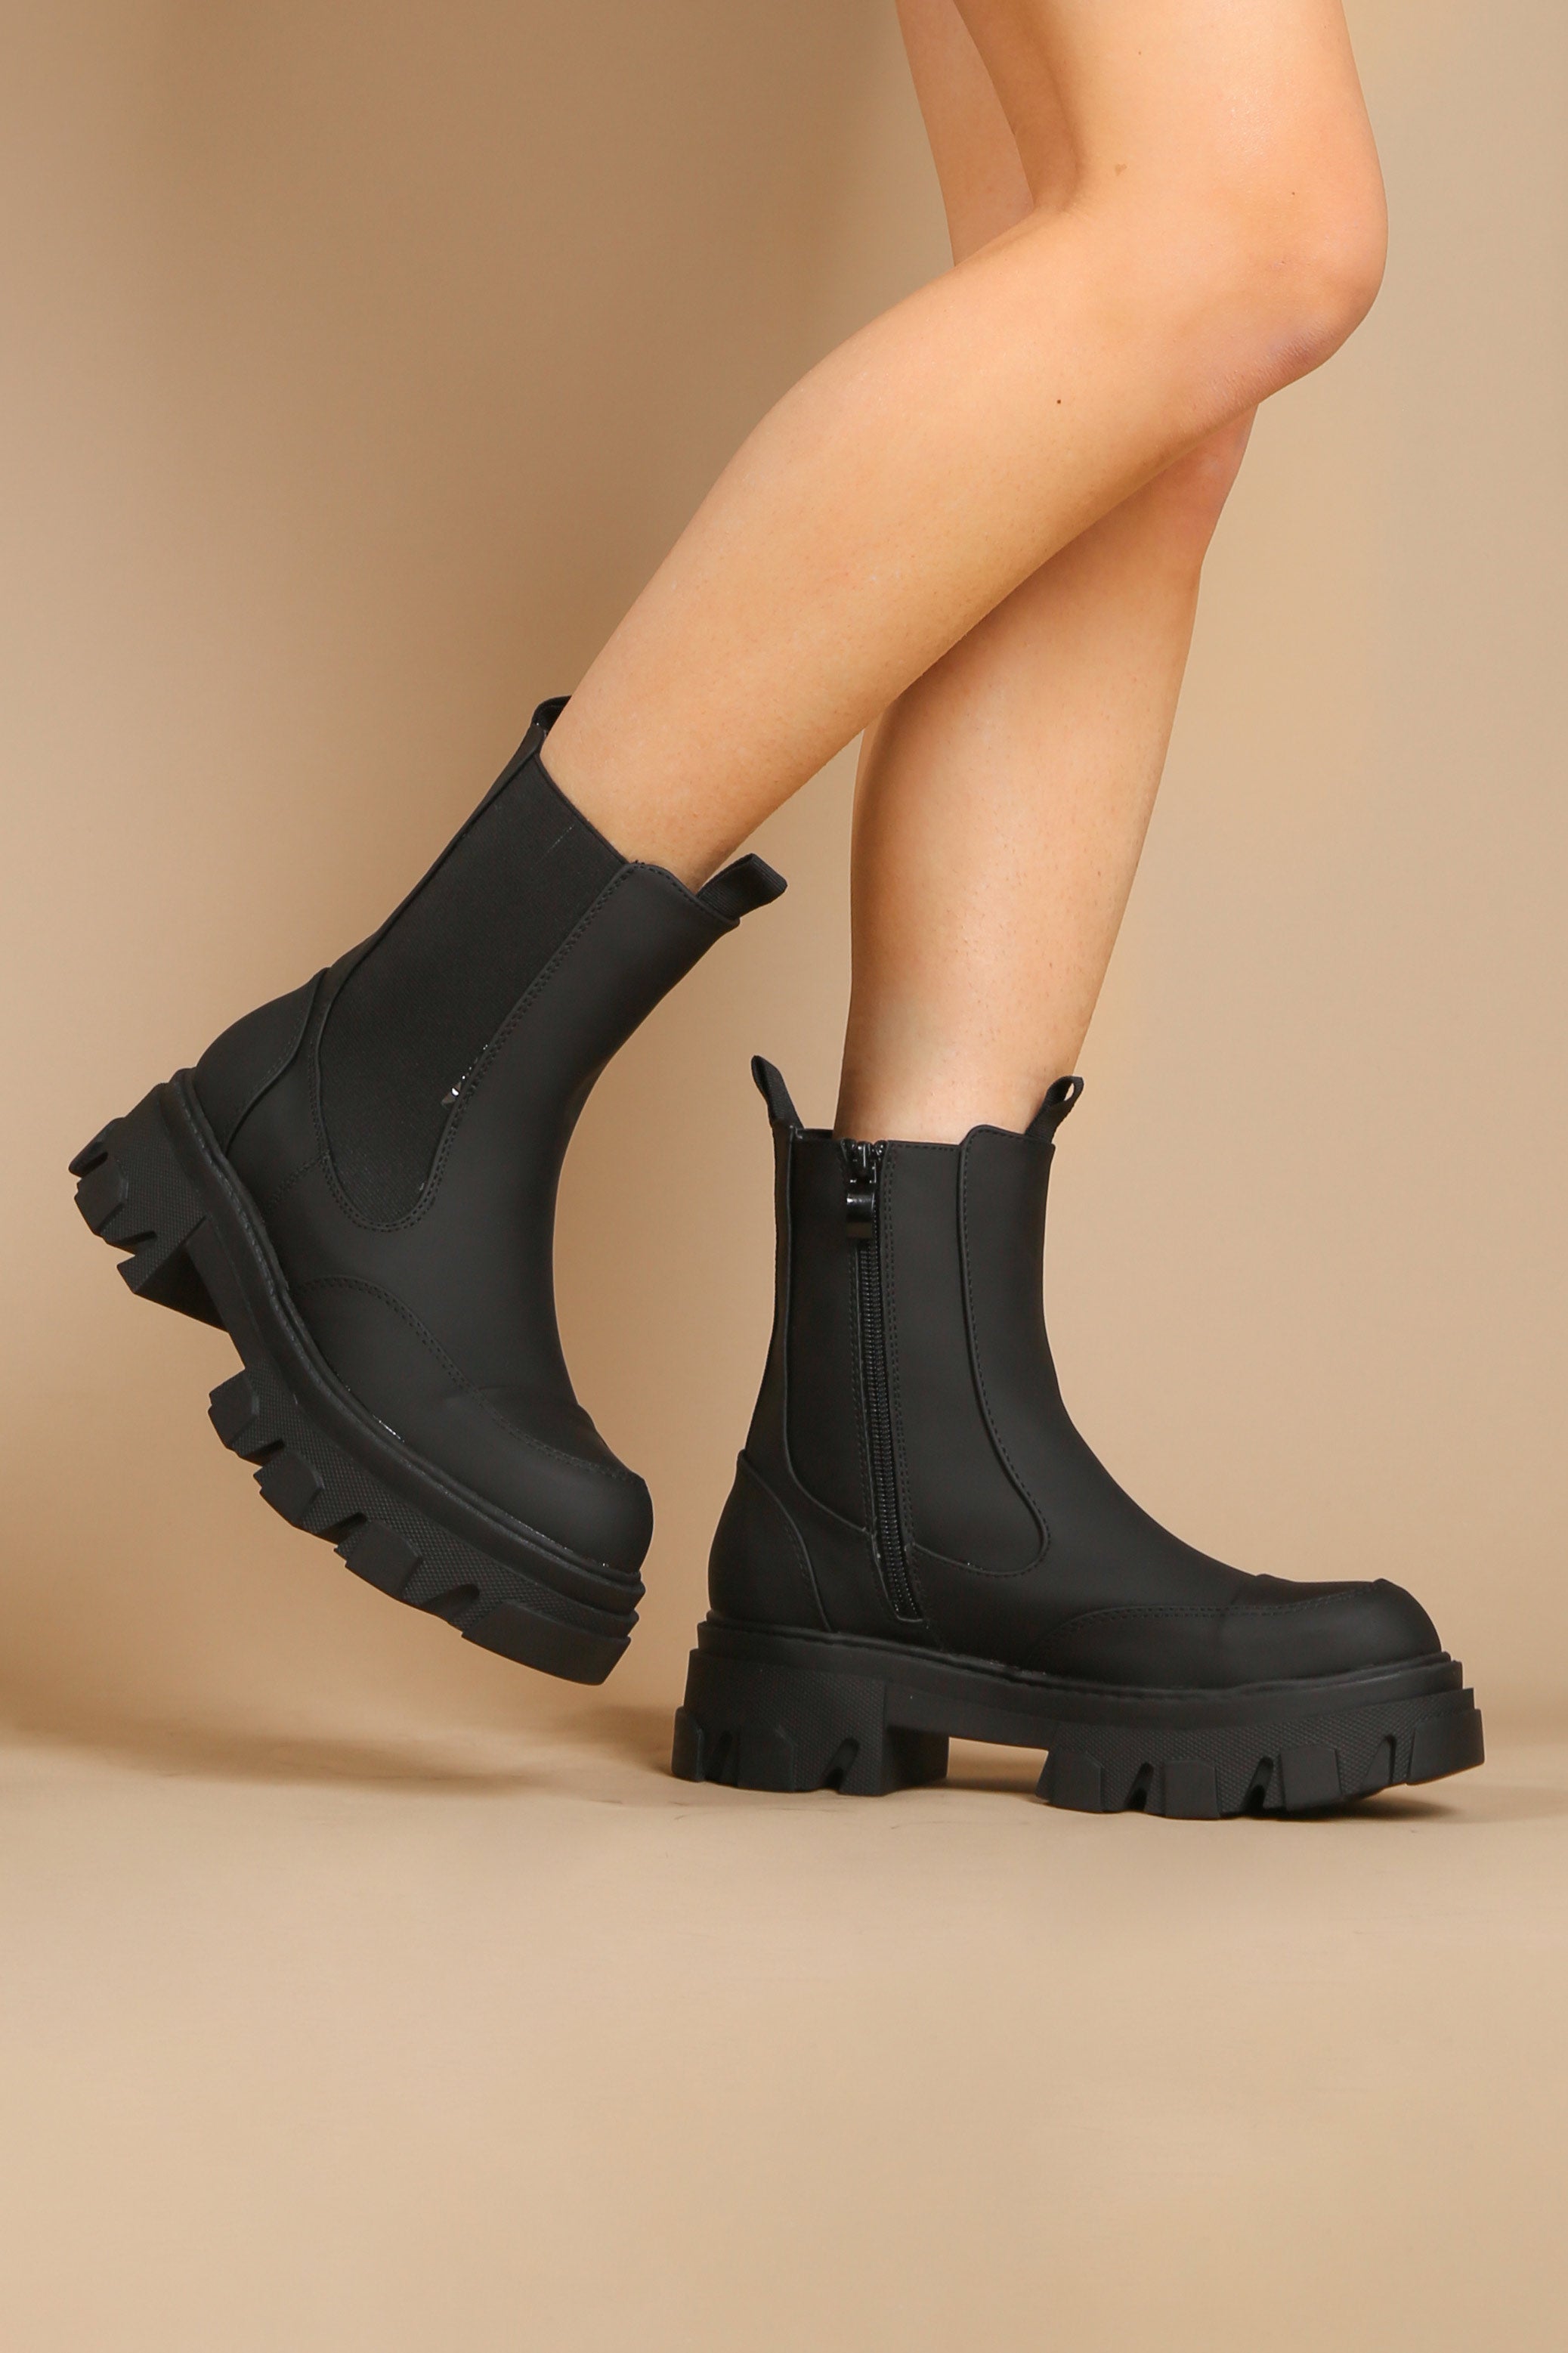 It's time to embrace the chunky ankle boot – here are 6 of the